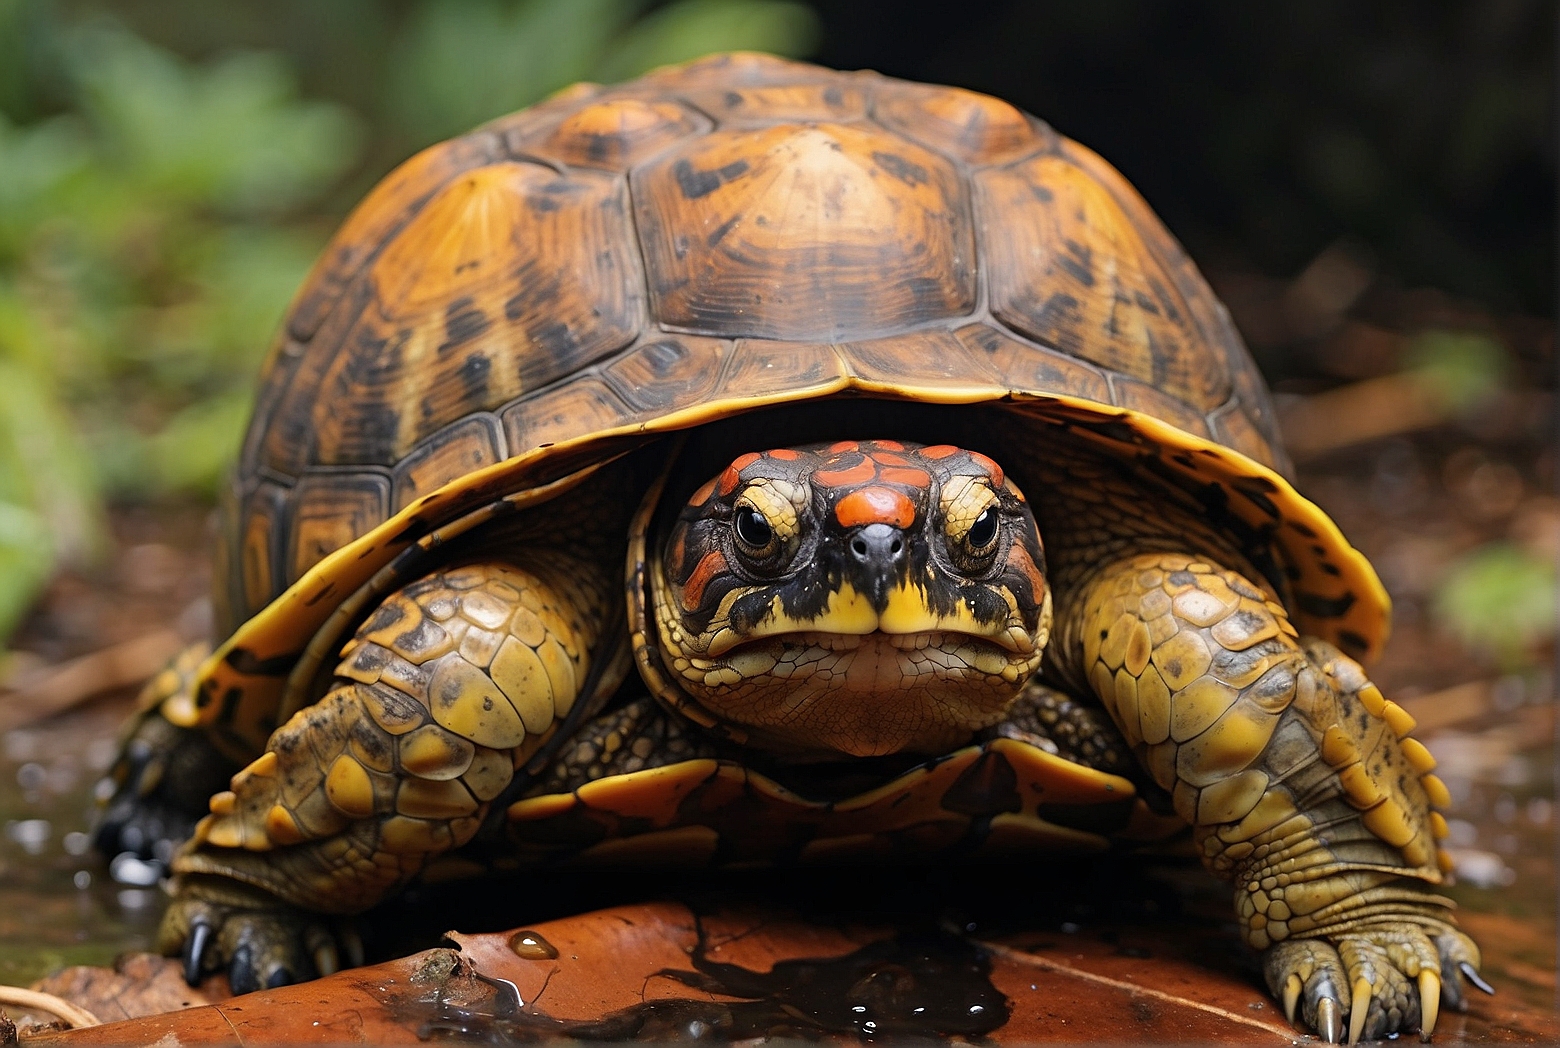 Maintaining Proper Humidity for Eastern Box Turtles